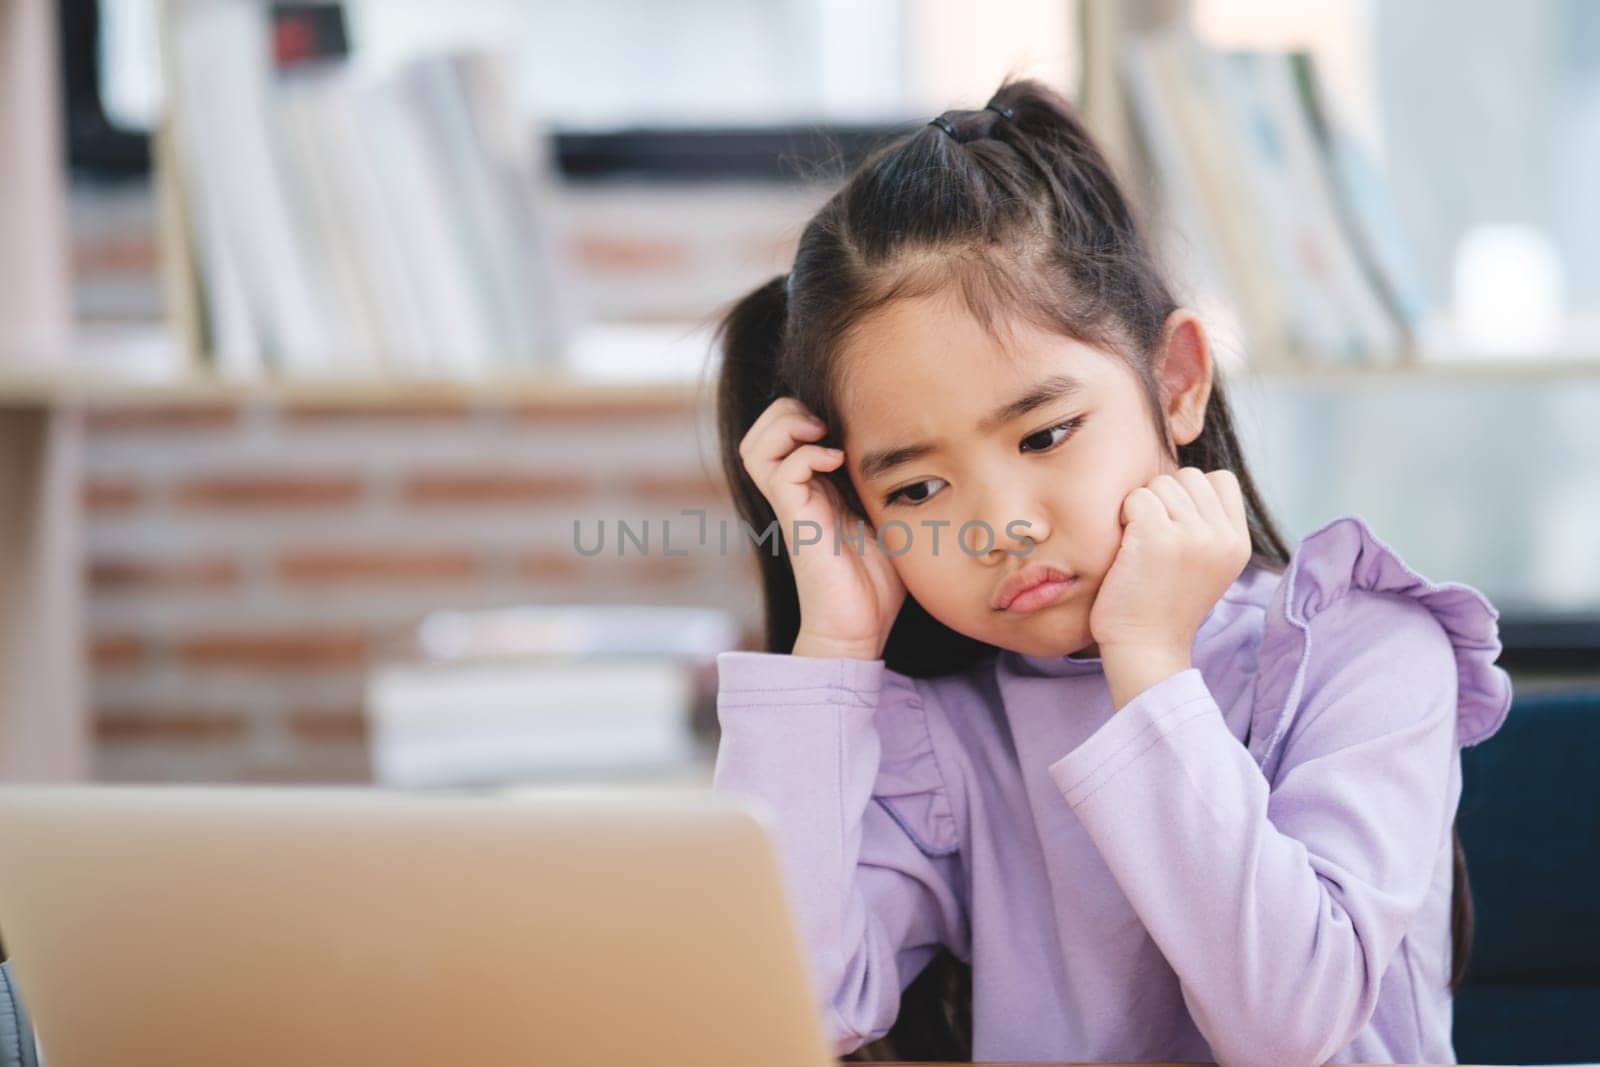 A young student appears disinterested and bored while engaging with an online class on her laptop.